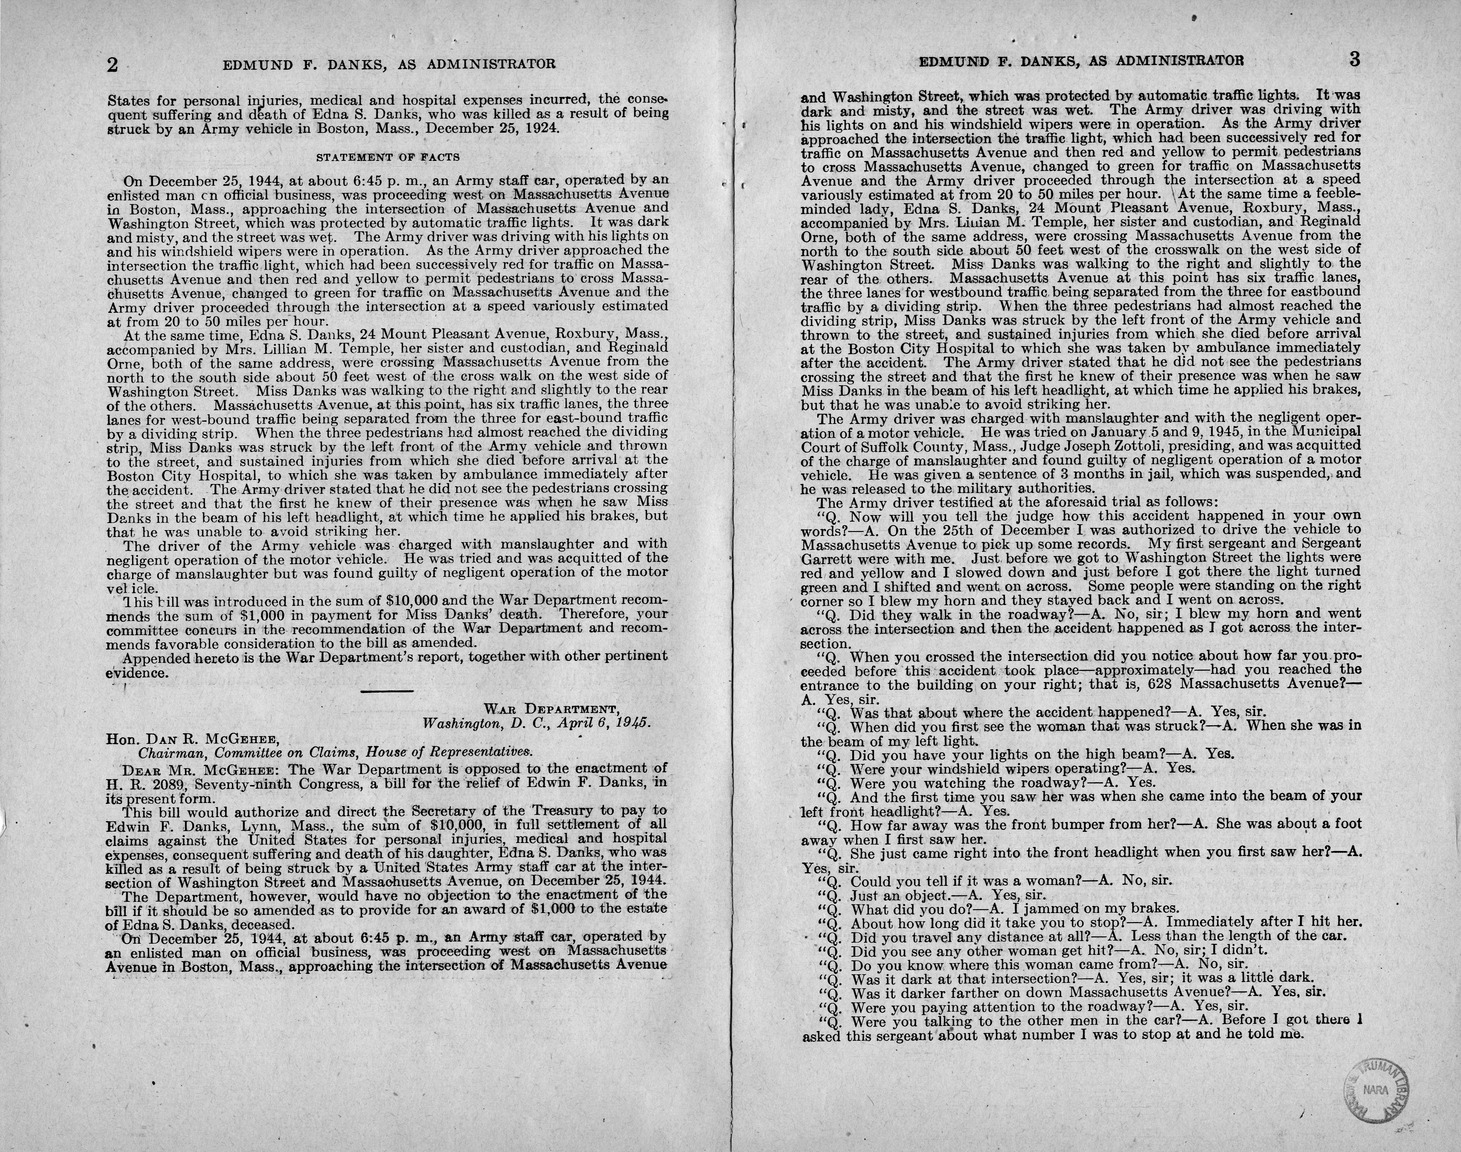 Memorandum from Frederick J. Bailey to M. C. Latta, H.R. 2089, for the Relief of Edmund F. Danks, as the Administrator of the Estate of Edna S. Danks, Deceased, with Attachments